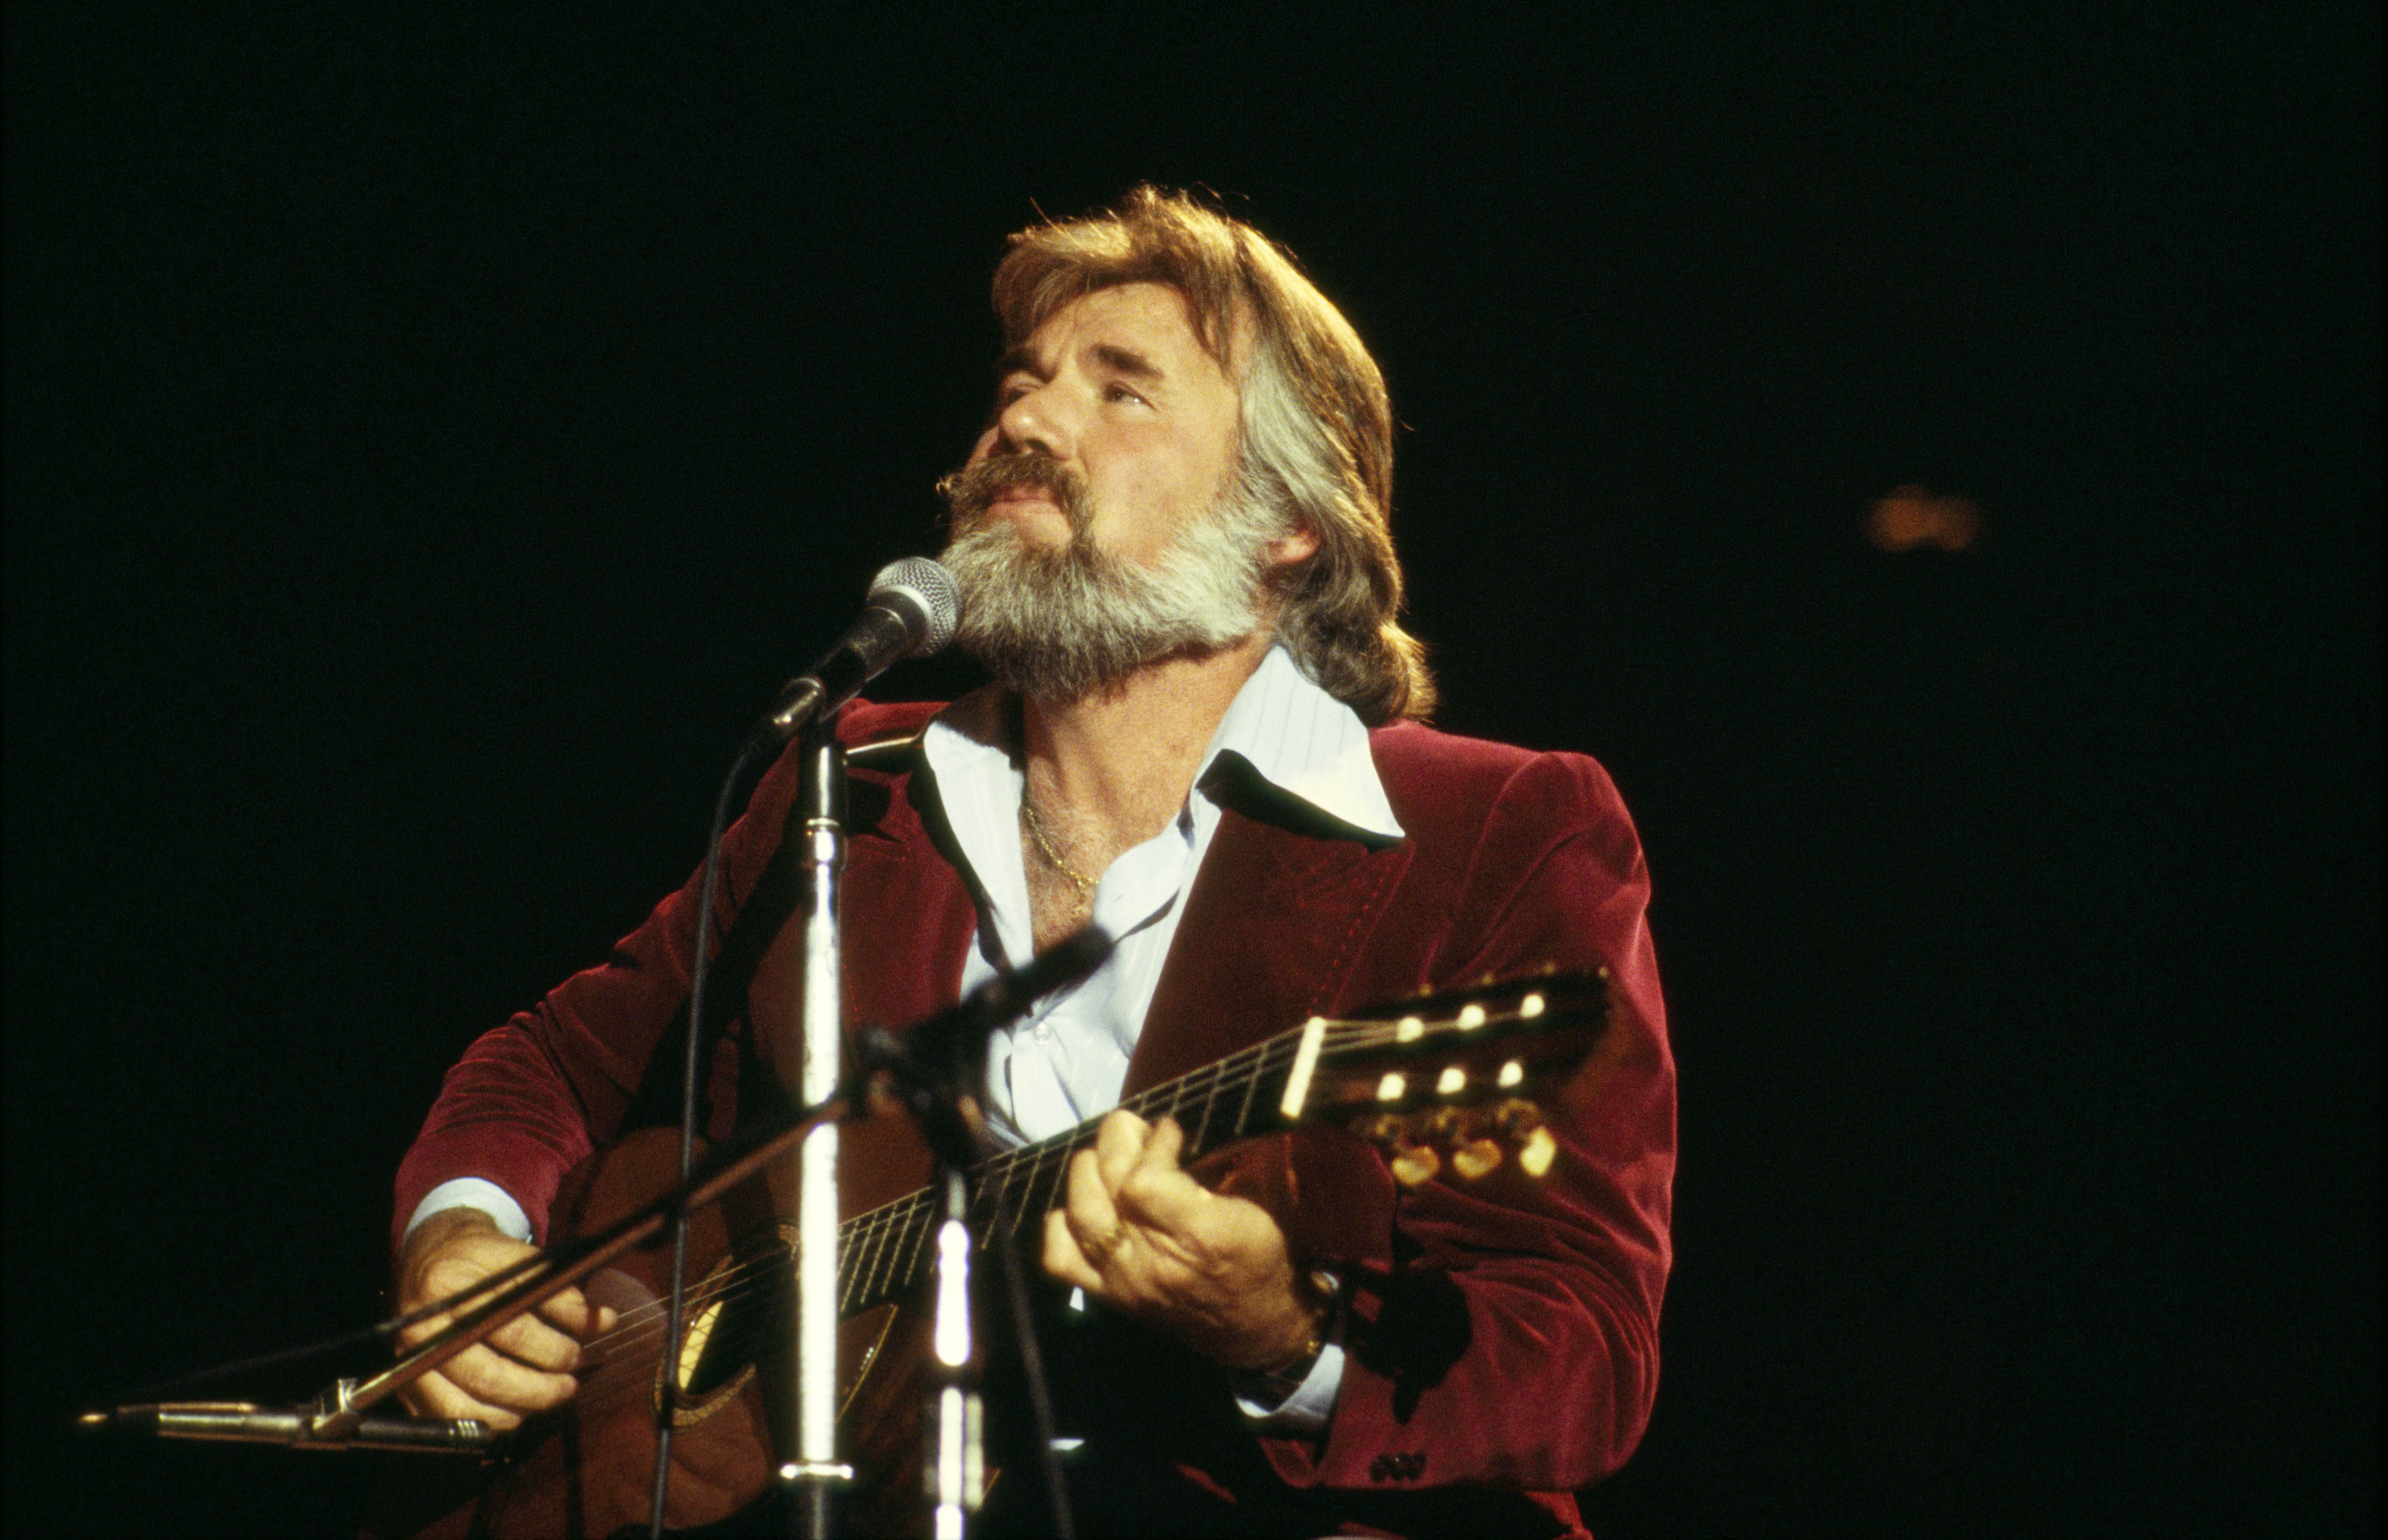 Kenny Rogers wears a red suit and plays the guitar in 1978.